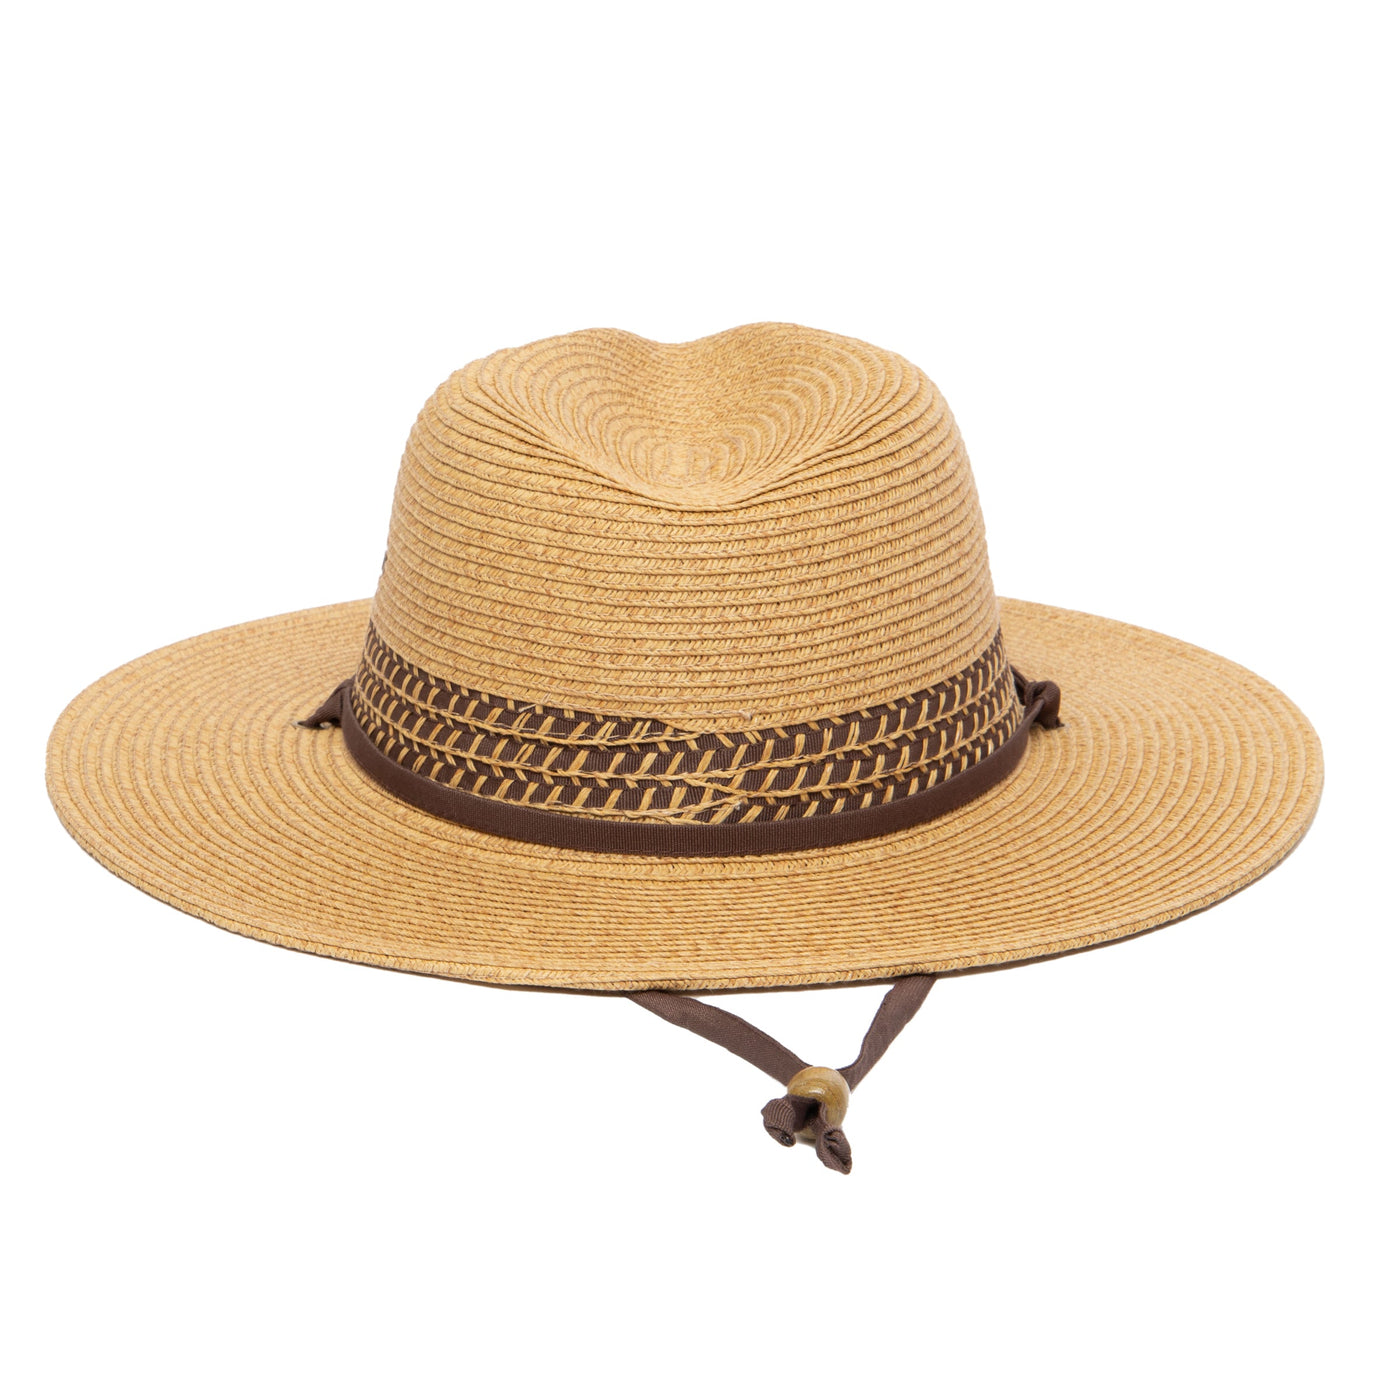 FEDORA - Men's Ultrabraid Outback With Chin Cord And Toggle